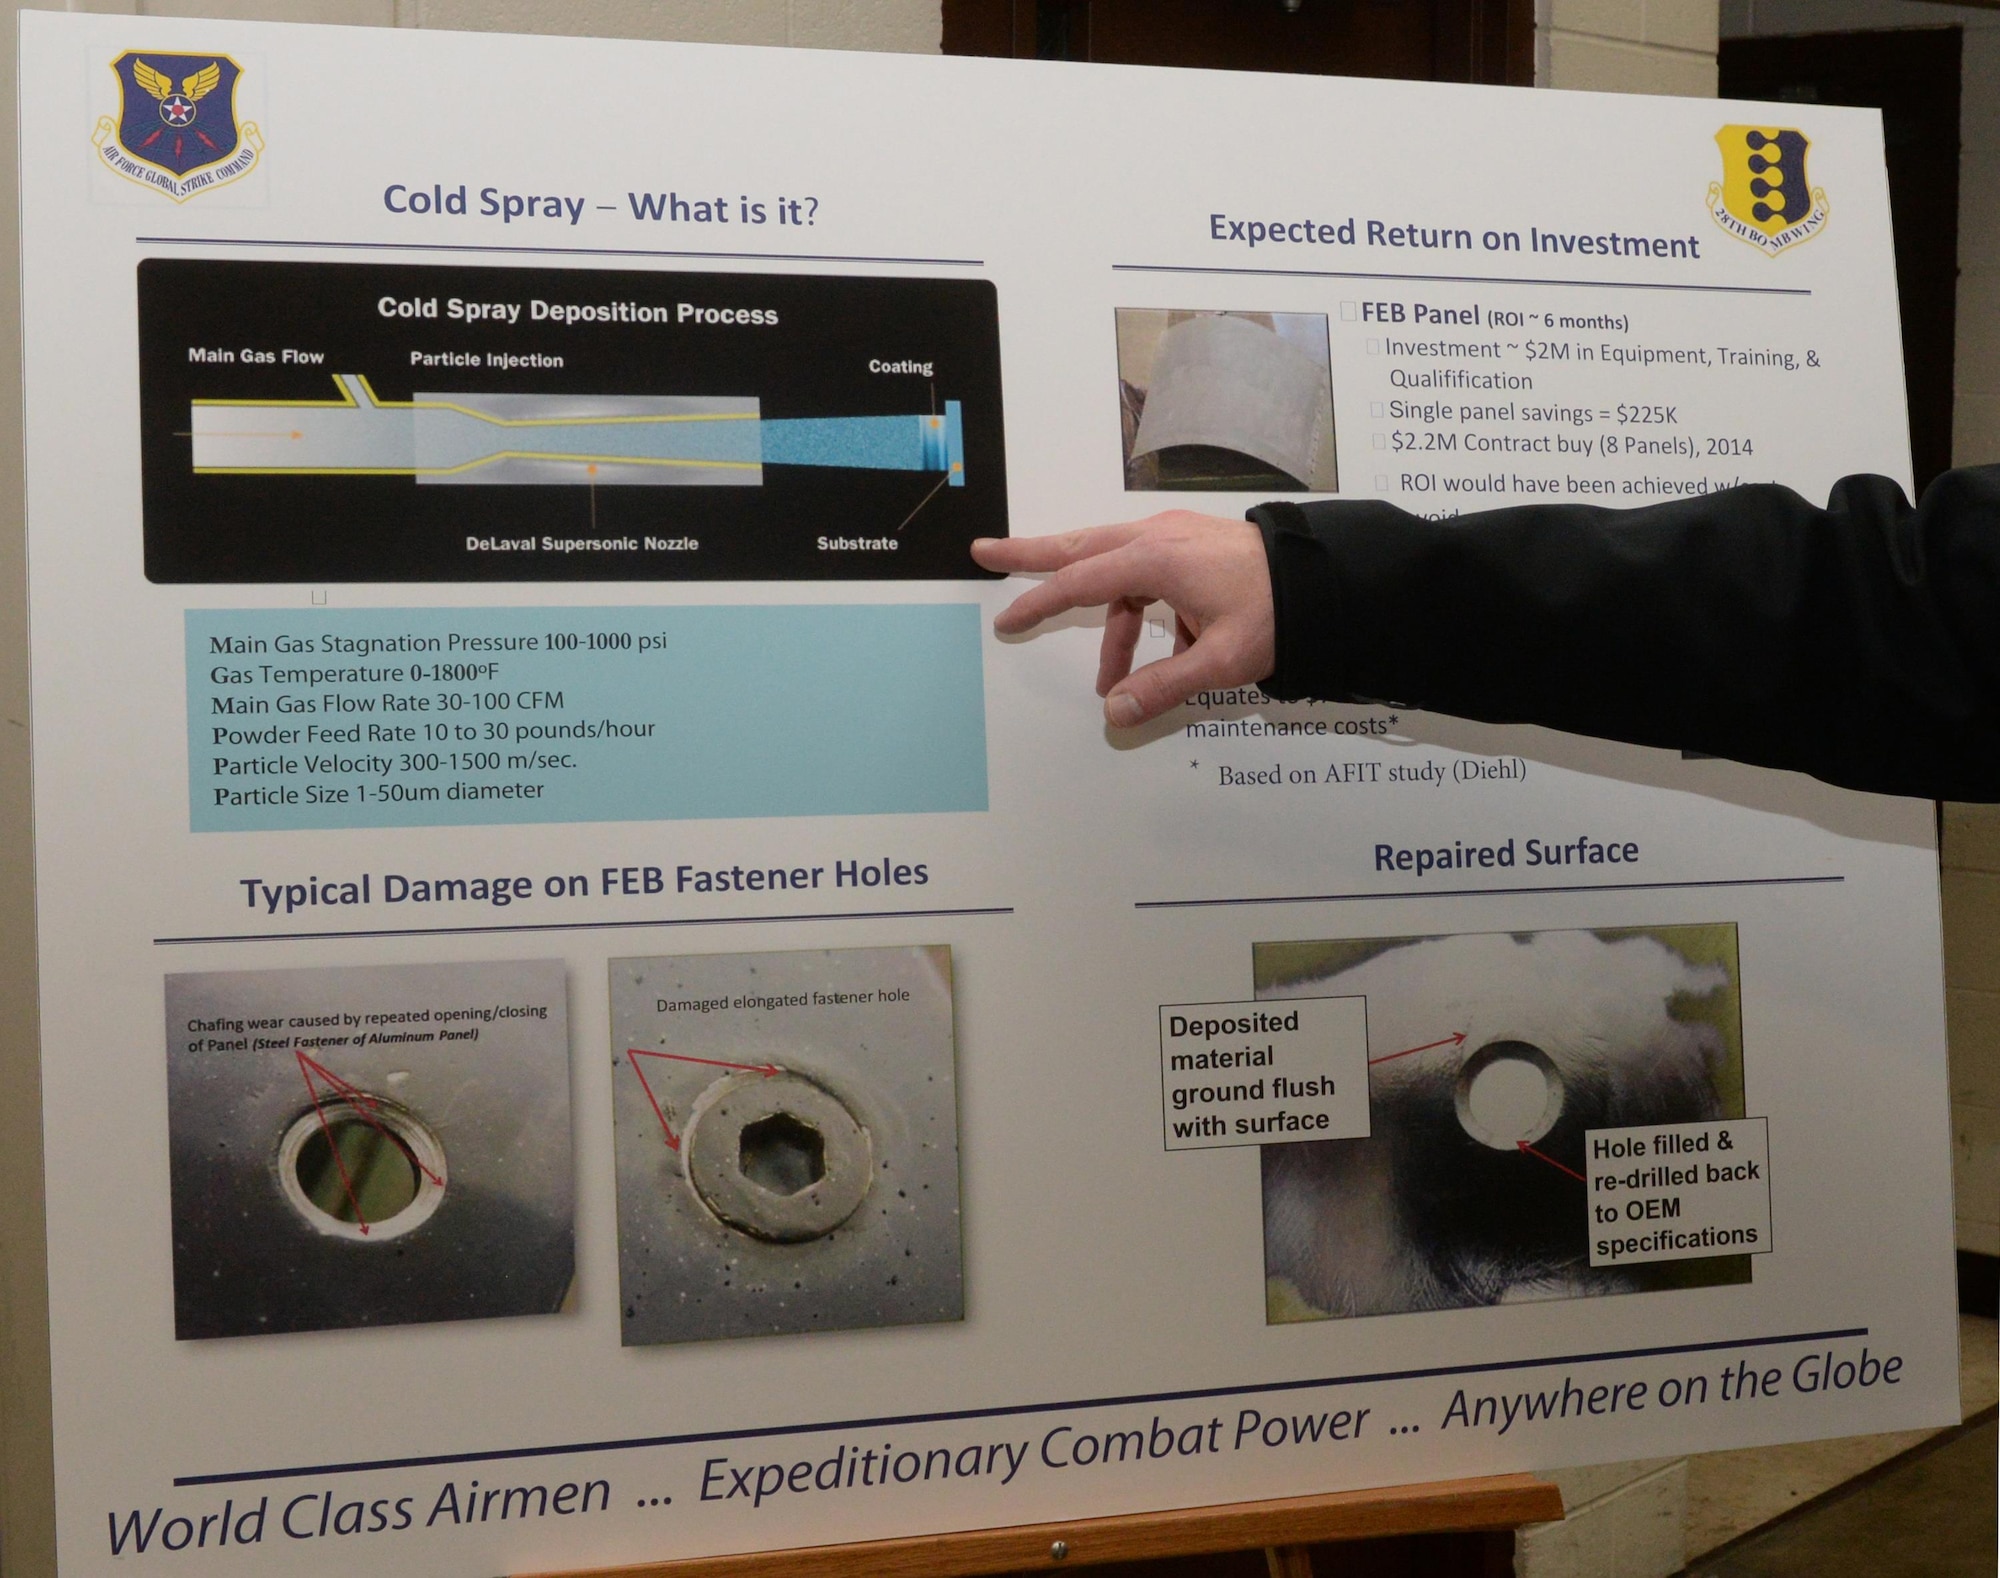 Brian James, 28th Maintenance Group senior engineering and technical advisor, explains the cold spray process at Ellsworth Air Force Base, S.D., Jan. 25, 2016. Cold spray is a technology that accelerates small particles of the substrate [whatever the material is made out of] to achieve a mechanical bond upon impact restoring the part back to the original specs. Ellsworth AFB personnel have been using this technology for more than two-years and the 28th Maintenance Group is expanding the capability by building a cold spray facility, which is slated to be fully operational in May. (U.S. Air Force photo by Airman Donald C. Knechtel/Released)